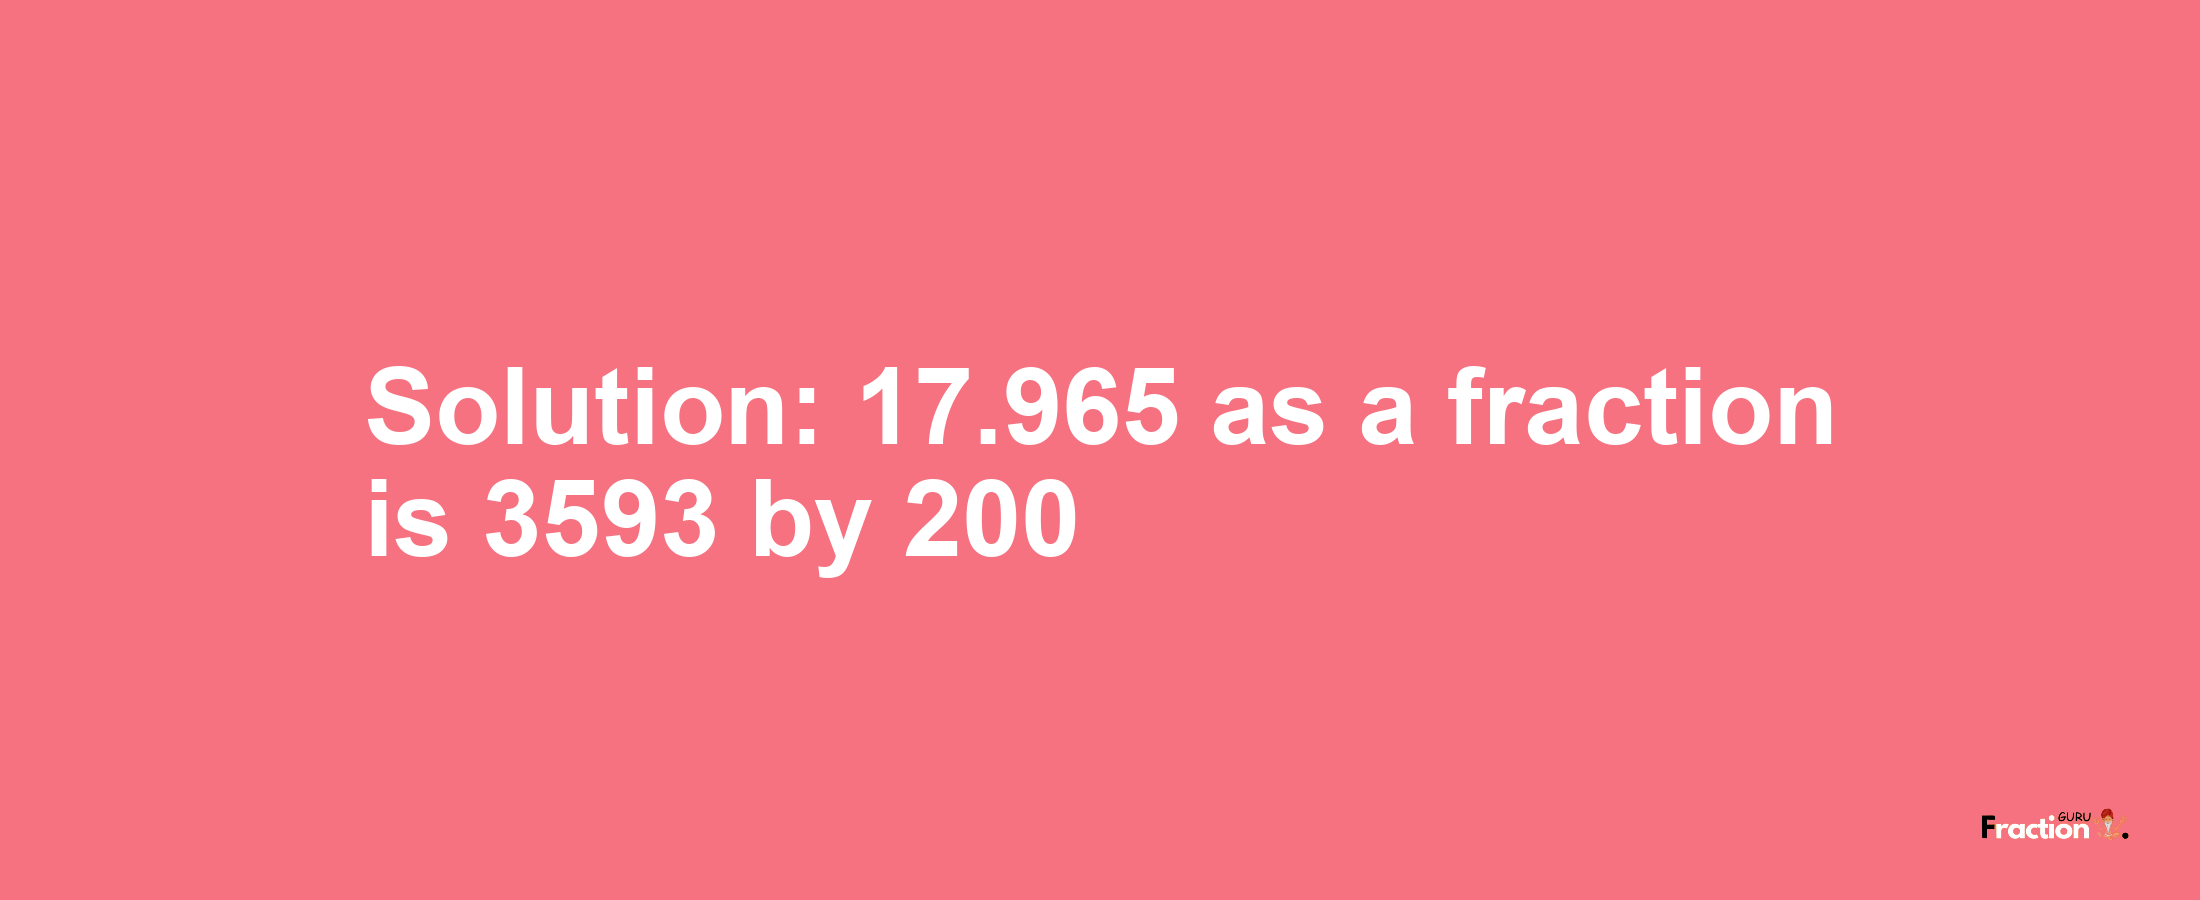 Solution:17.965 as a fraction is 3593/200